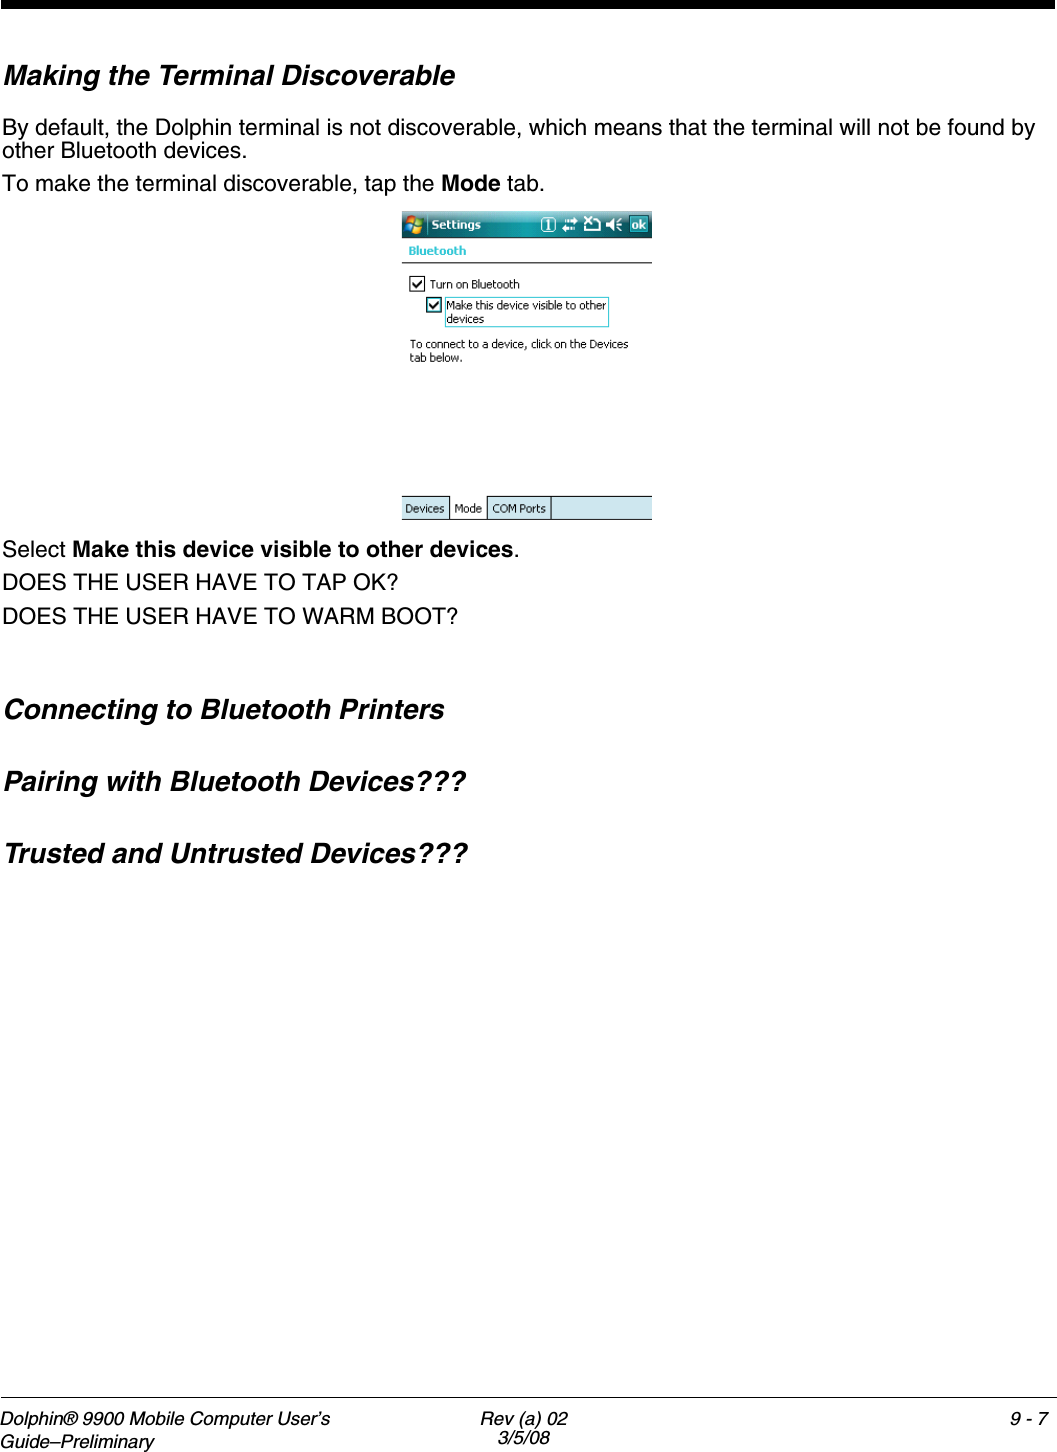 Dolphin® 9900 Mobile Computer User’s Guide–Preliminary Rev (a) 023/5/089 - 5Types of Devices and ServicesWhen you tap Add new device on the Devices tab, the Bluetooth radio scans for discoverable Bluetooth devices, which appear in a list. Device TypesThe different types of devices each have an icon.Supported ServicesThe services that appear on the Partnership Settings window when Bluetooth tries to connect to another device are the services that are mutually supported on both devices.Icon Device Type????????Desktop or laptopPDA-type deviceBluetooth-compatible phone????????????